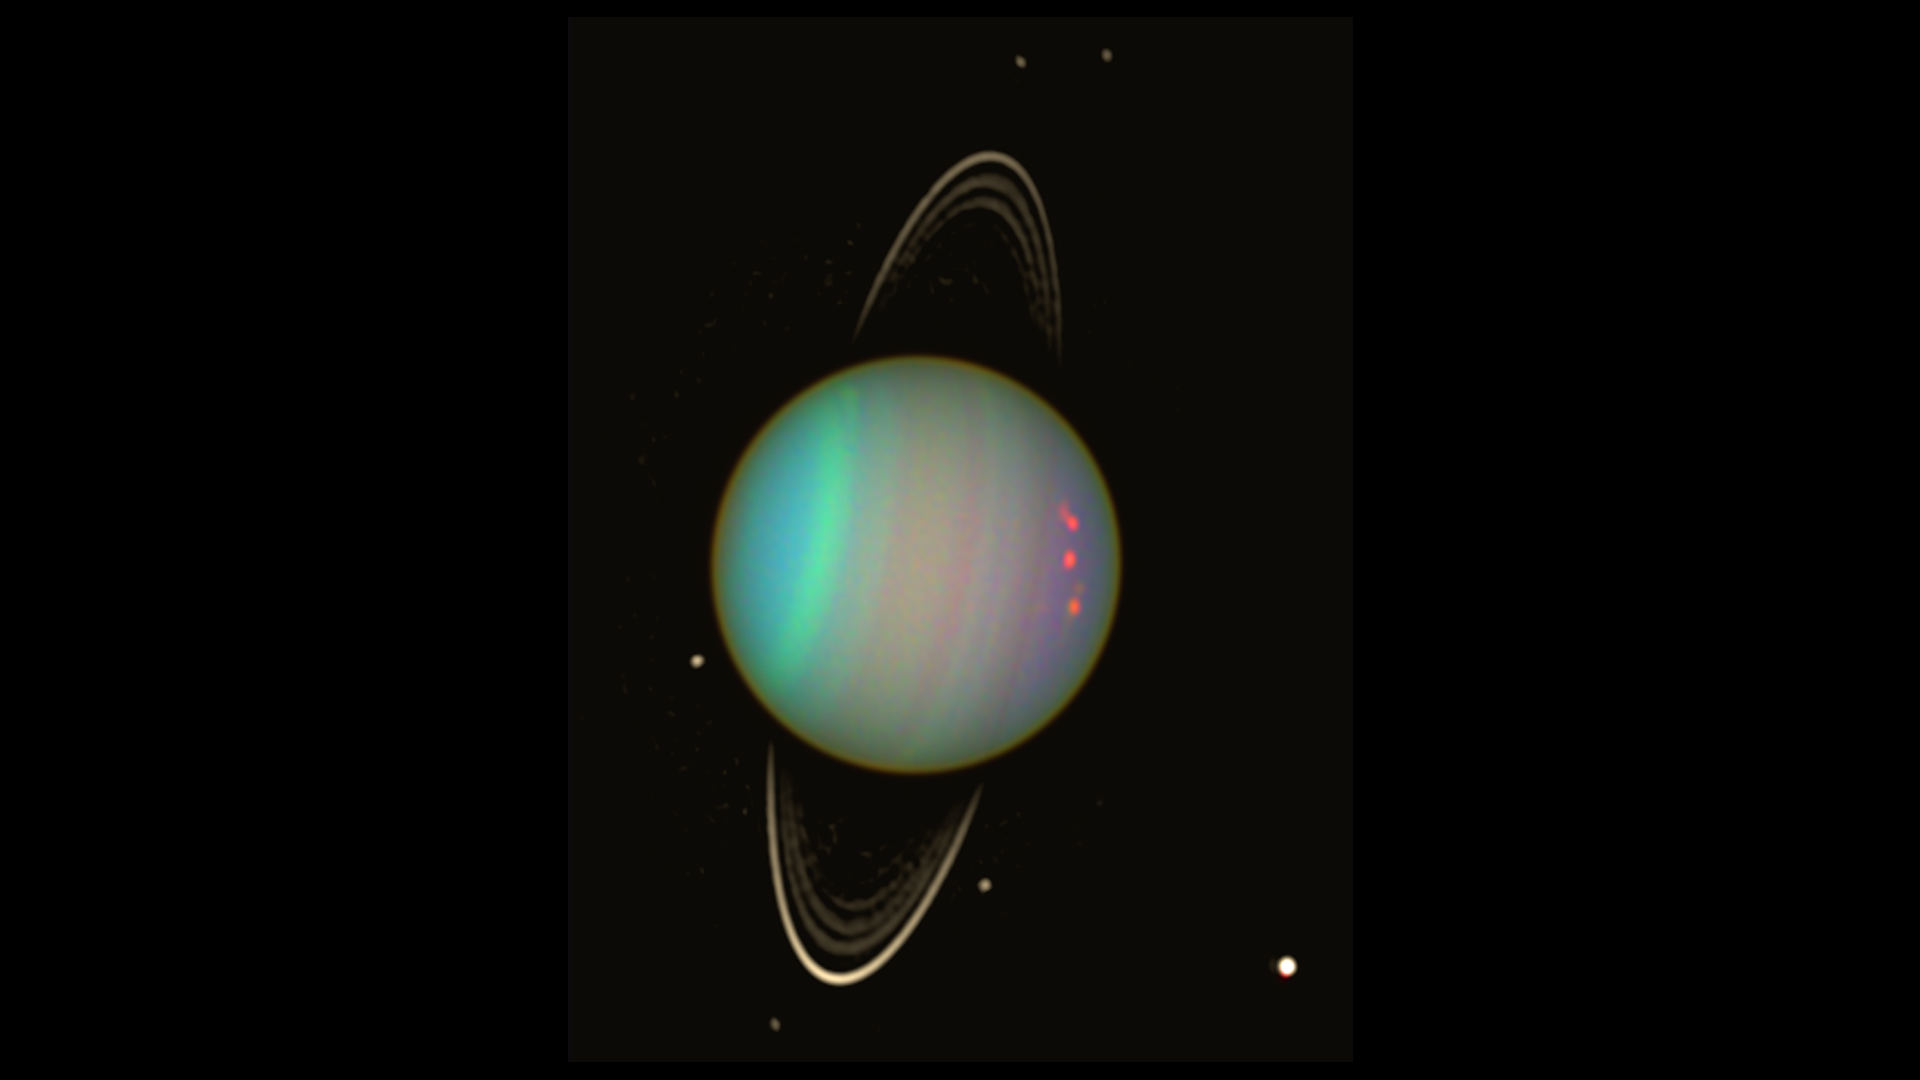 Uranus is seen in this false-color view from NASA's Hubble Space Telescope 